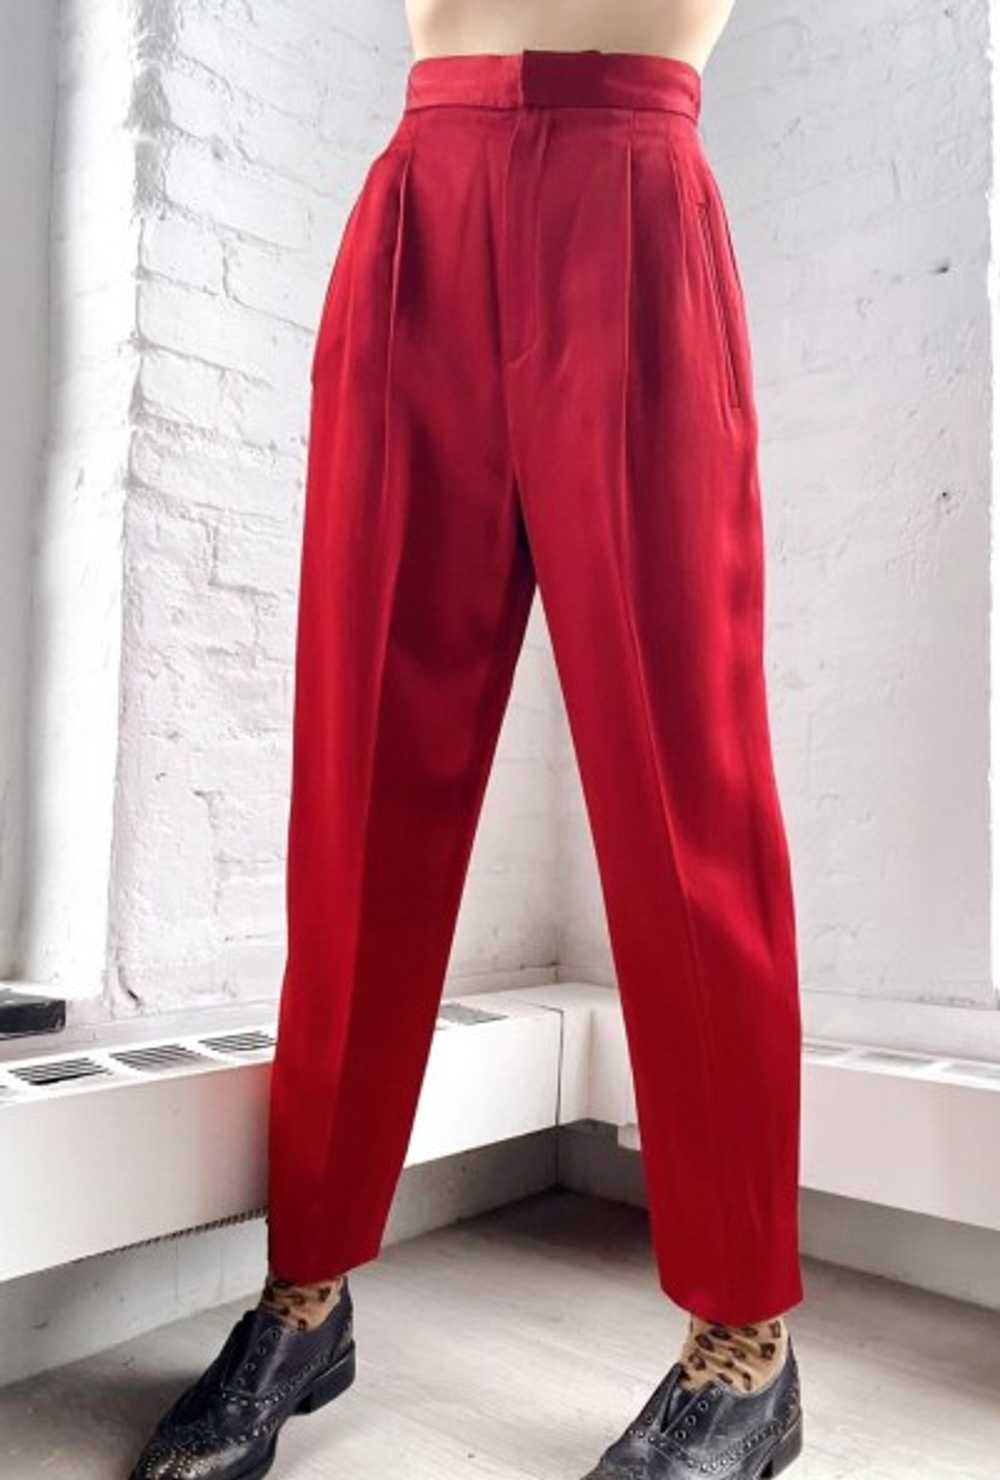 incredible satin rouge trousers - image 4